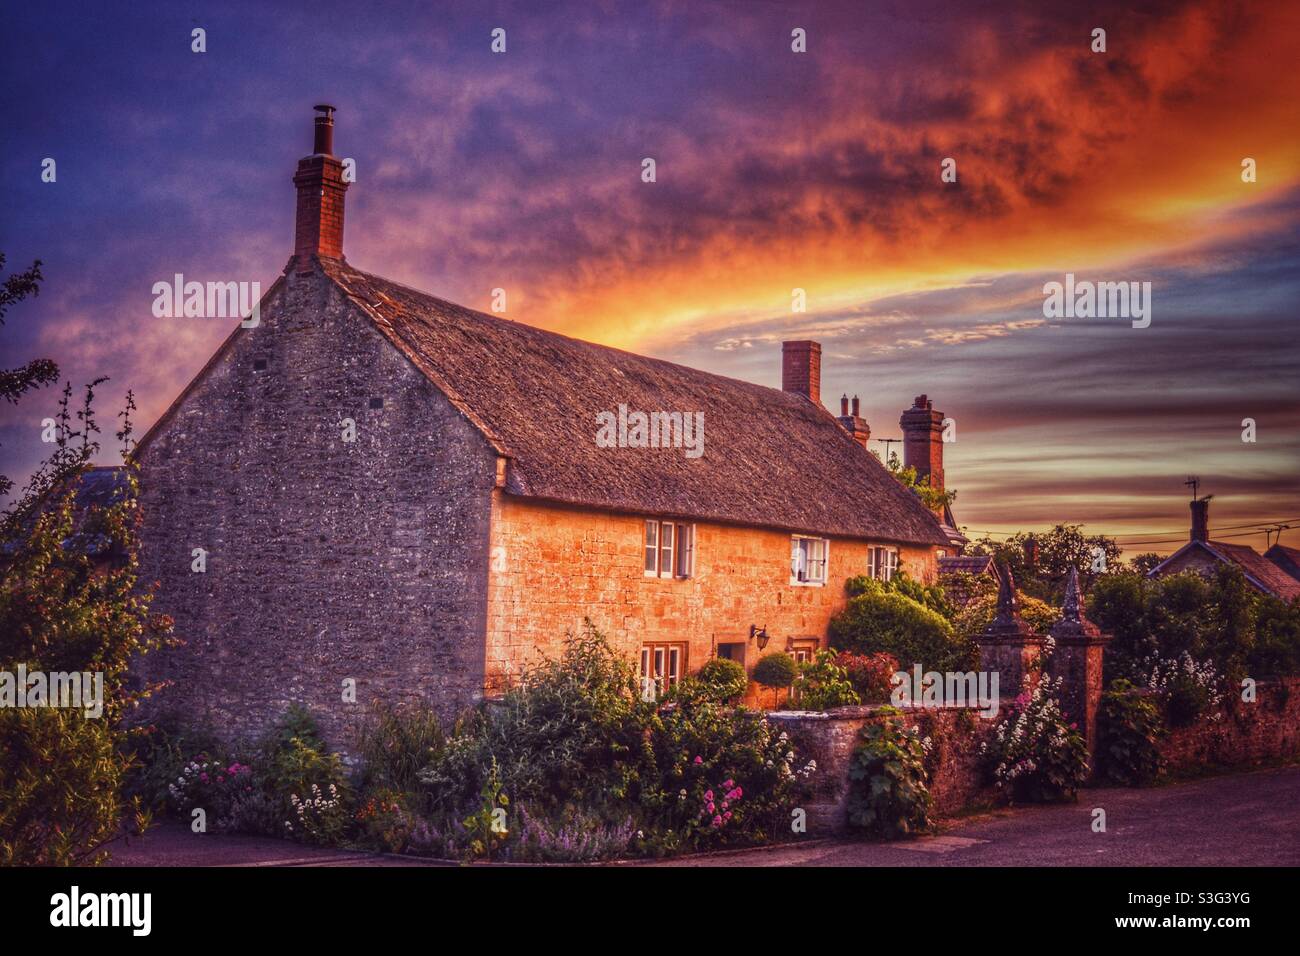 Thatched cottage at sunset in an English rural village, Somerset, U.K. Stock Photo